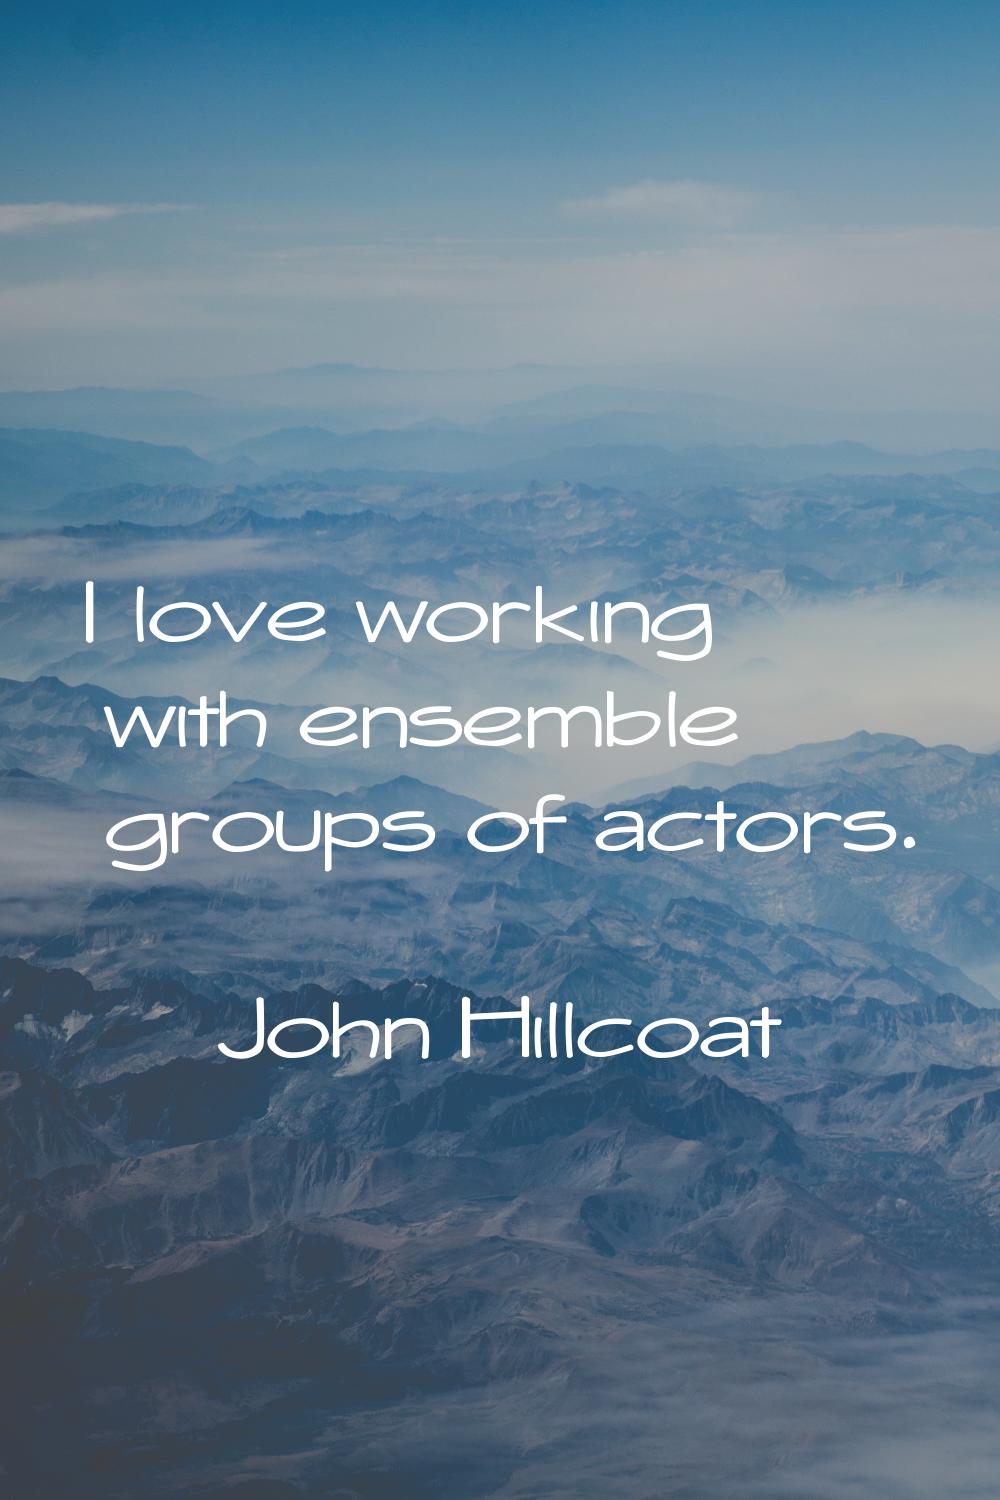 I love working with ensemble groups of actors.